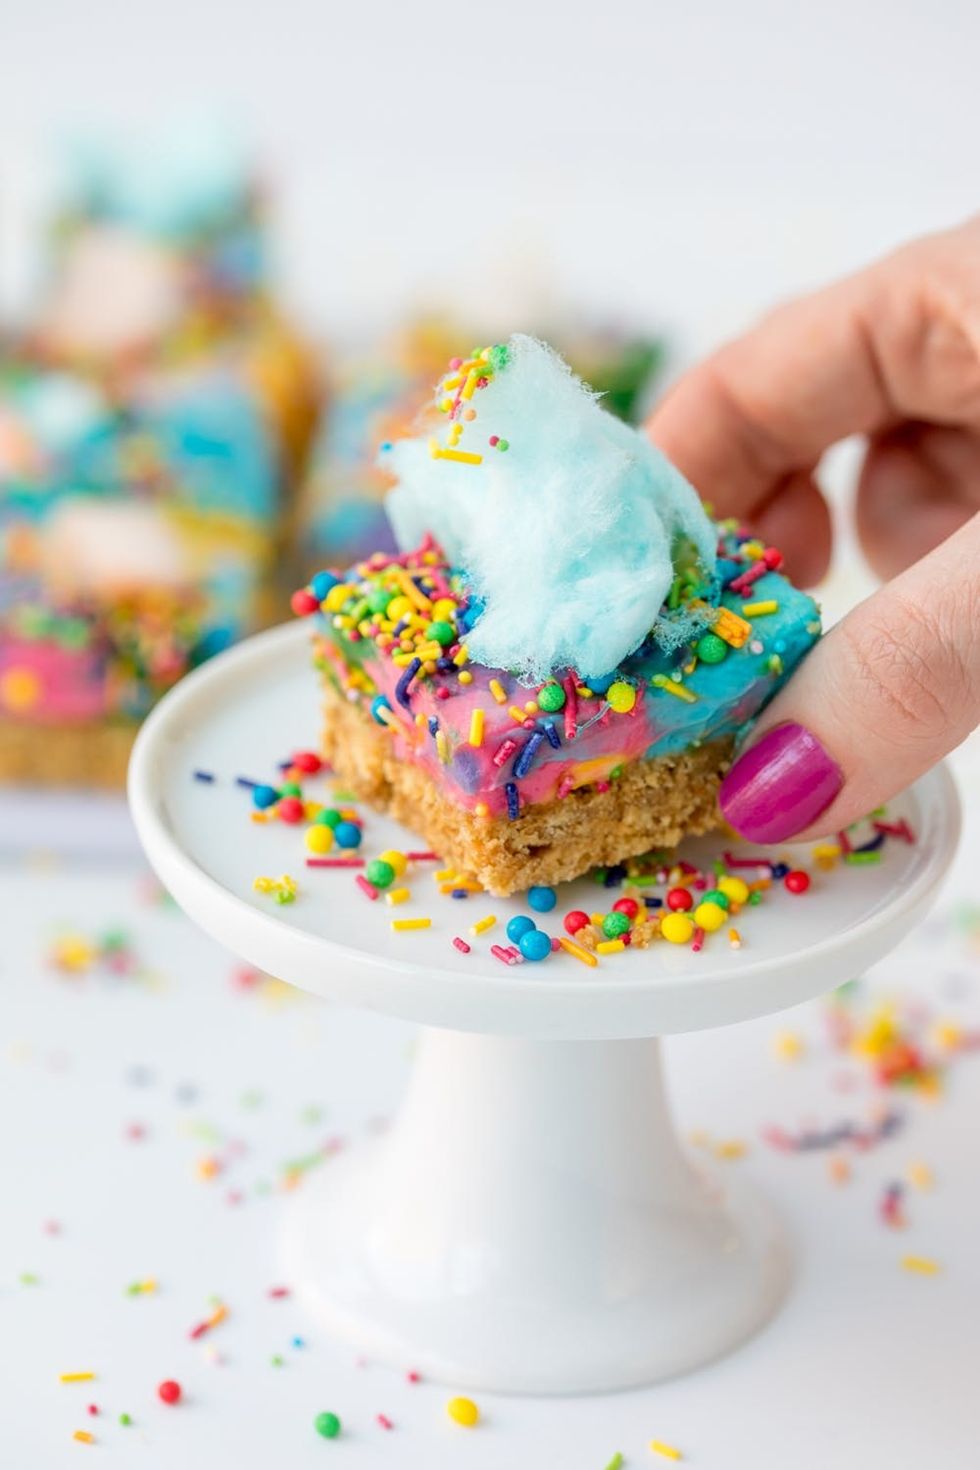 Check out our Lisa Frank Inspired Rainbow Cheesecake Recipe!